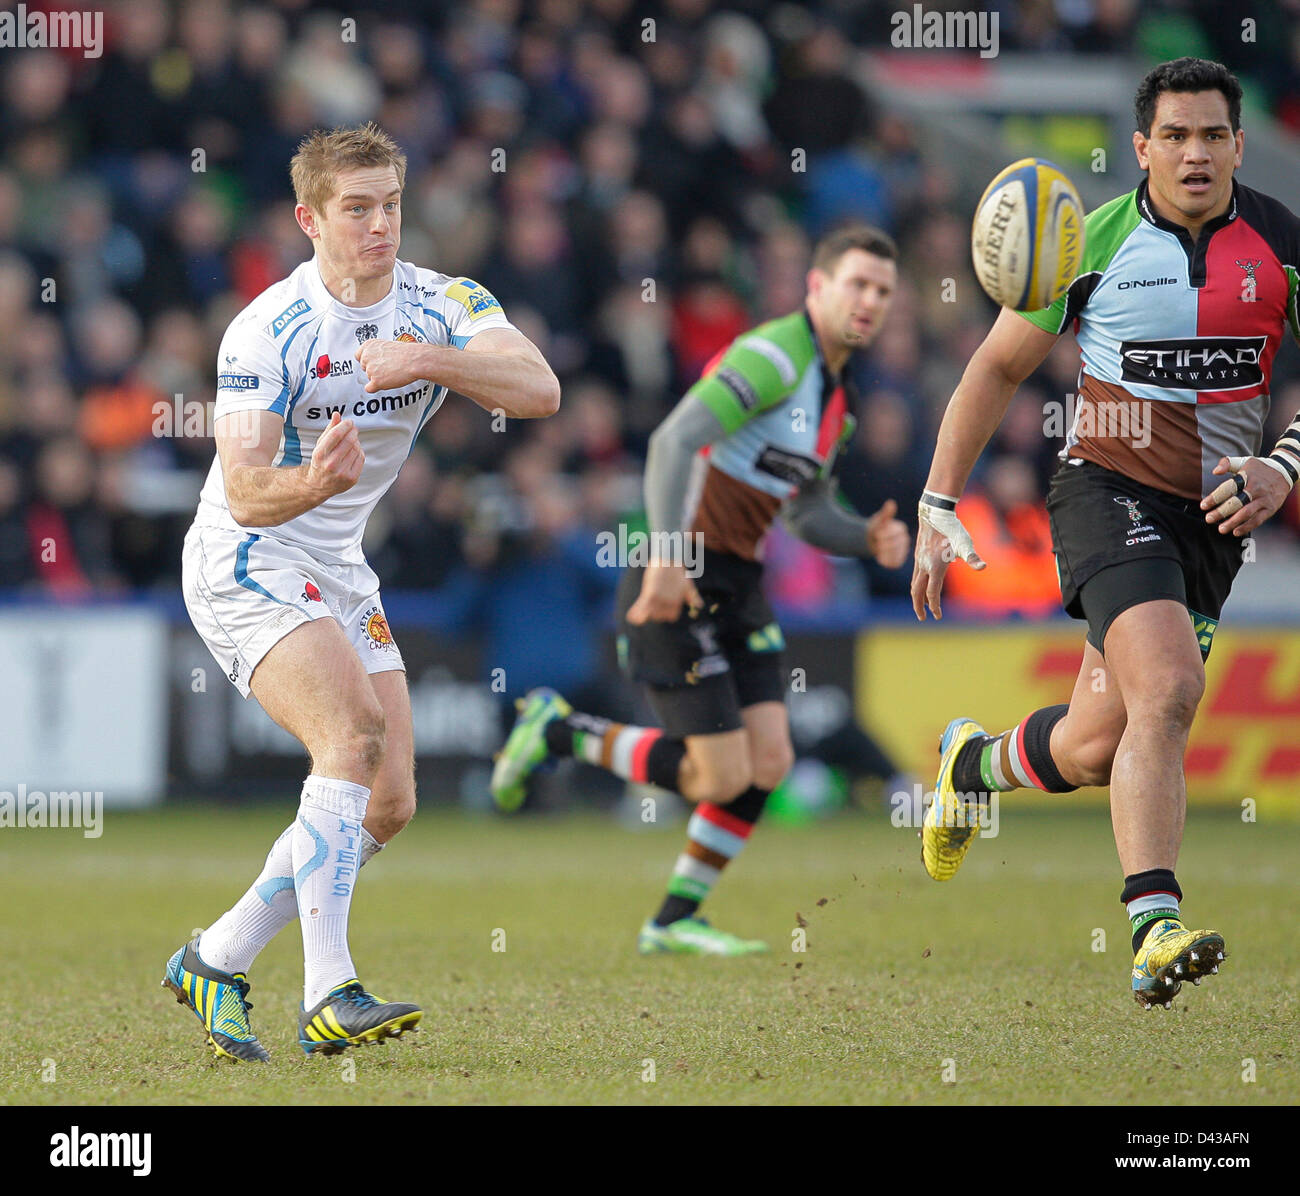 02.03.2013 London, England. Gareth Steenson in action during the Aviva Premiership game between Harlequins and Exeter Chiefs from The Stoop. Stock Photo